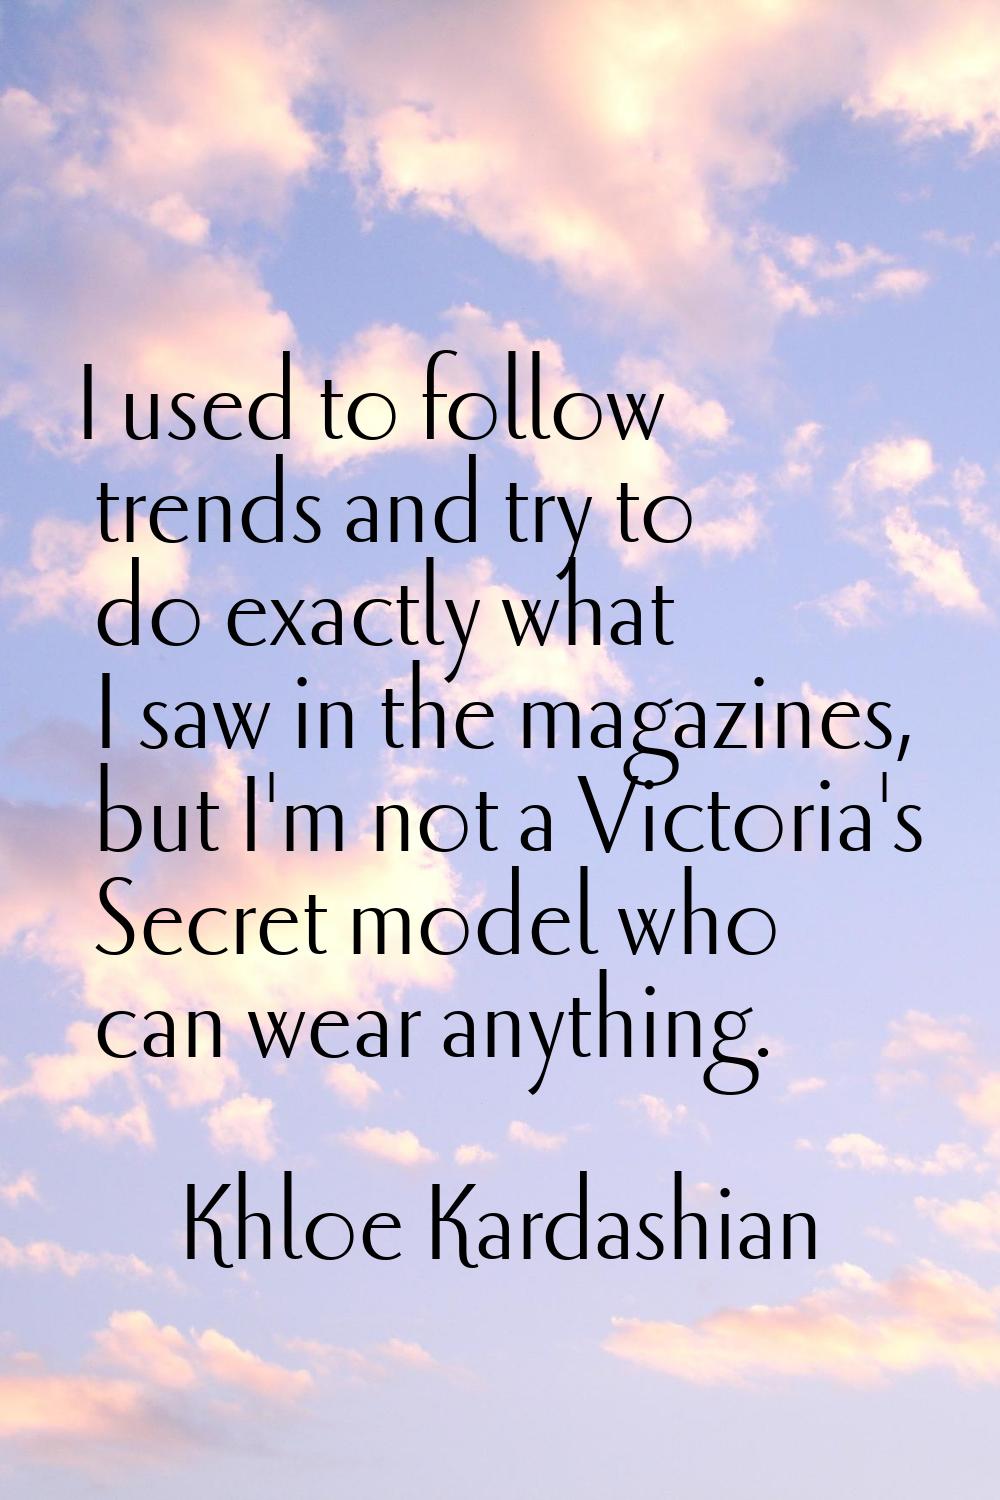 I used to follow trends and try to do exactly what I saw in the magazines, but I'm not a Victoria's